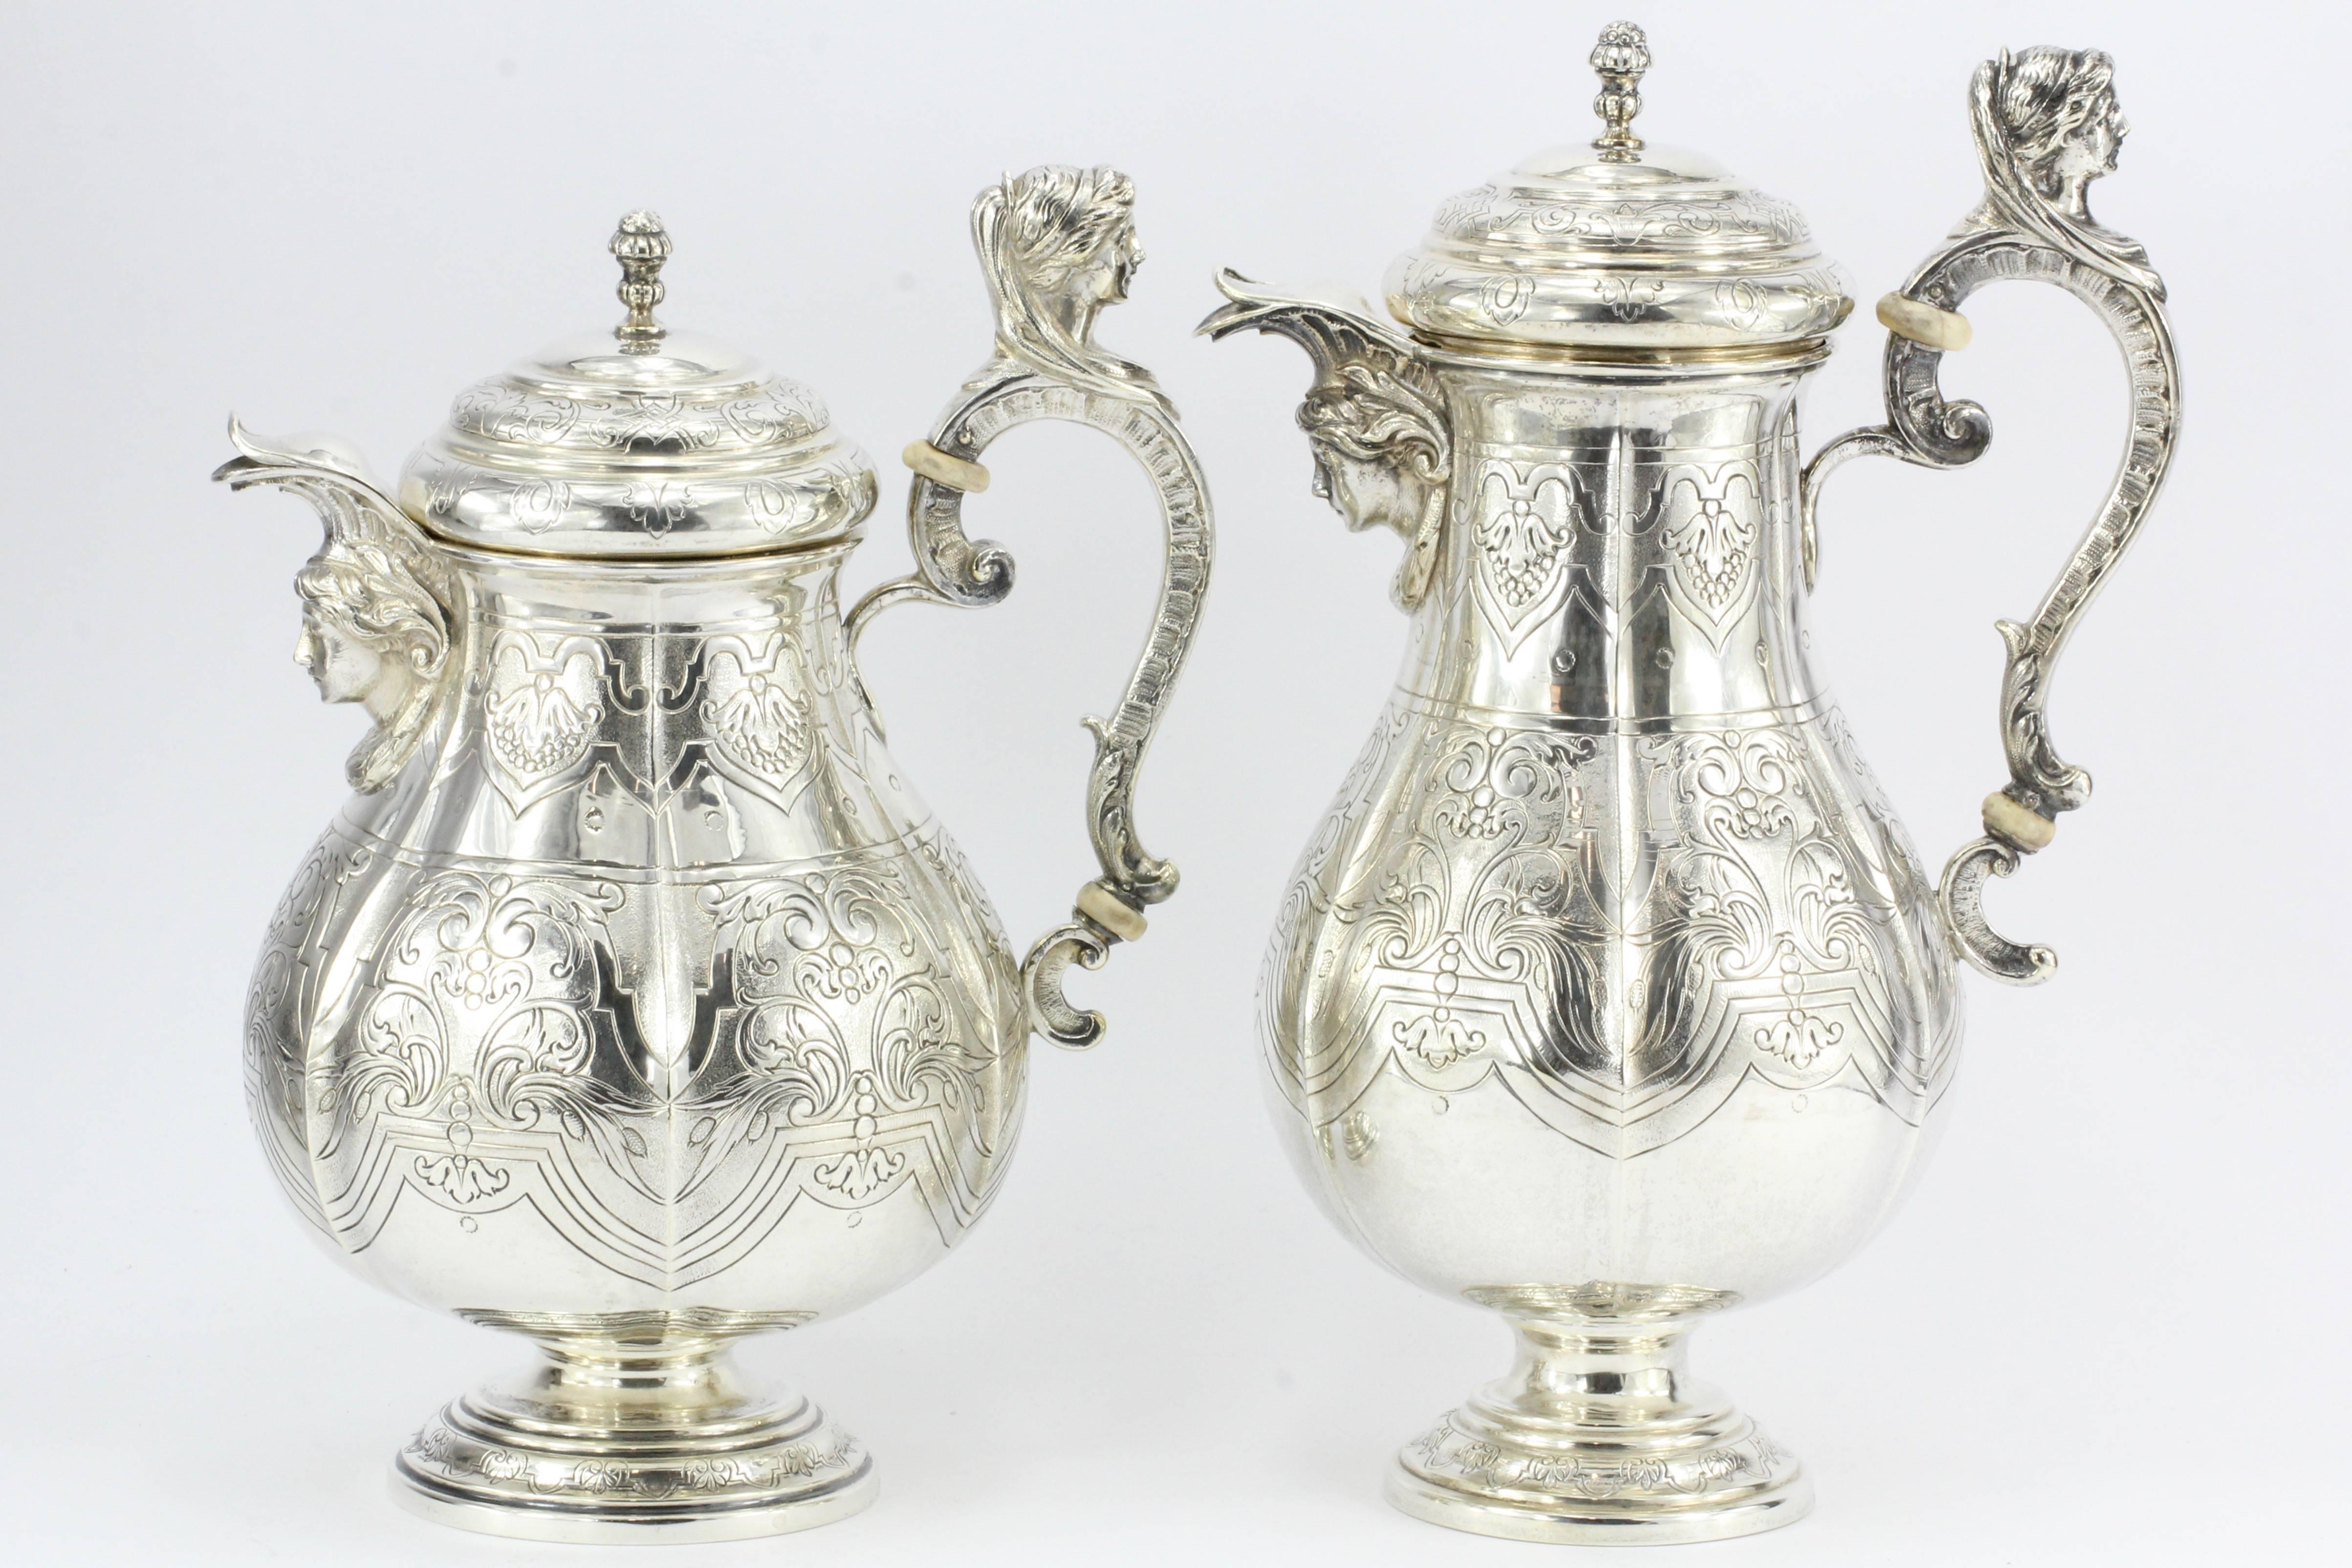 Hand-Crafted Antique Georg Roth Hanau German Silver Figural Revival Five-Piece Tea Set For Sale